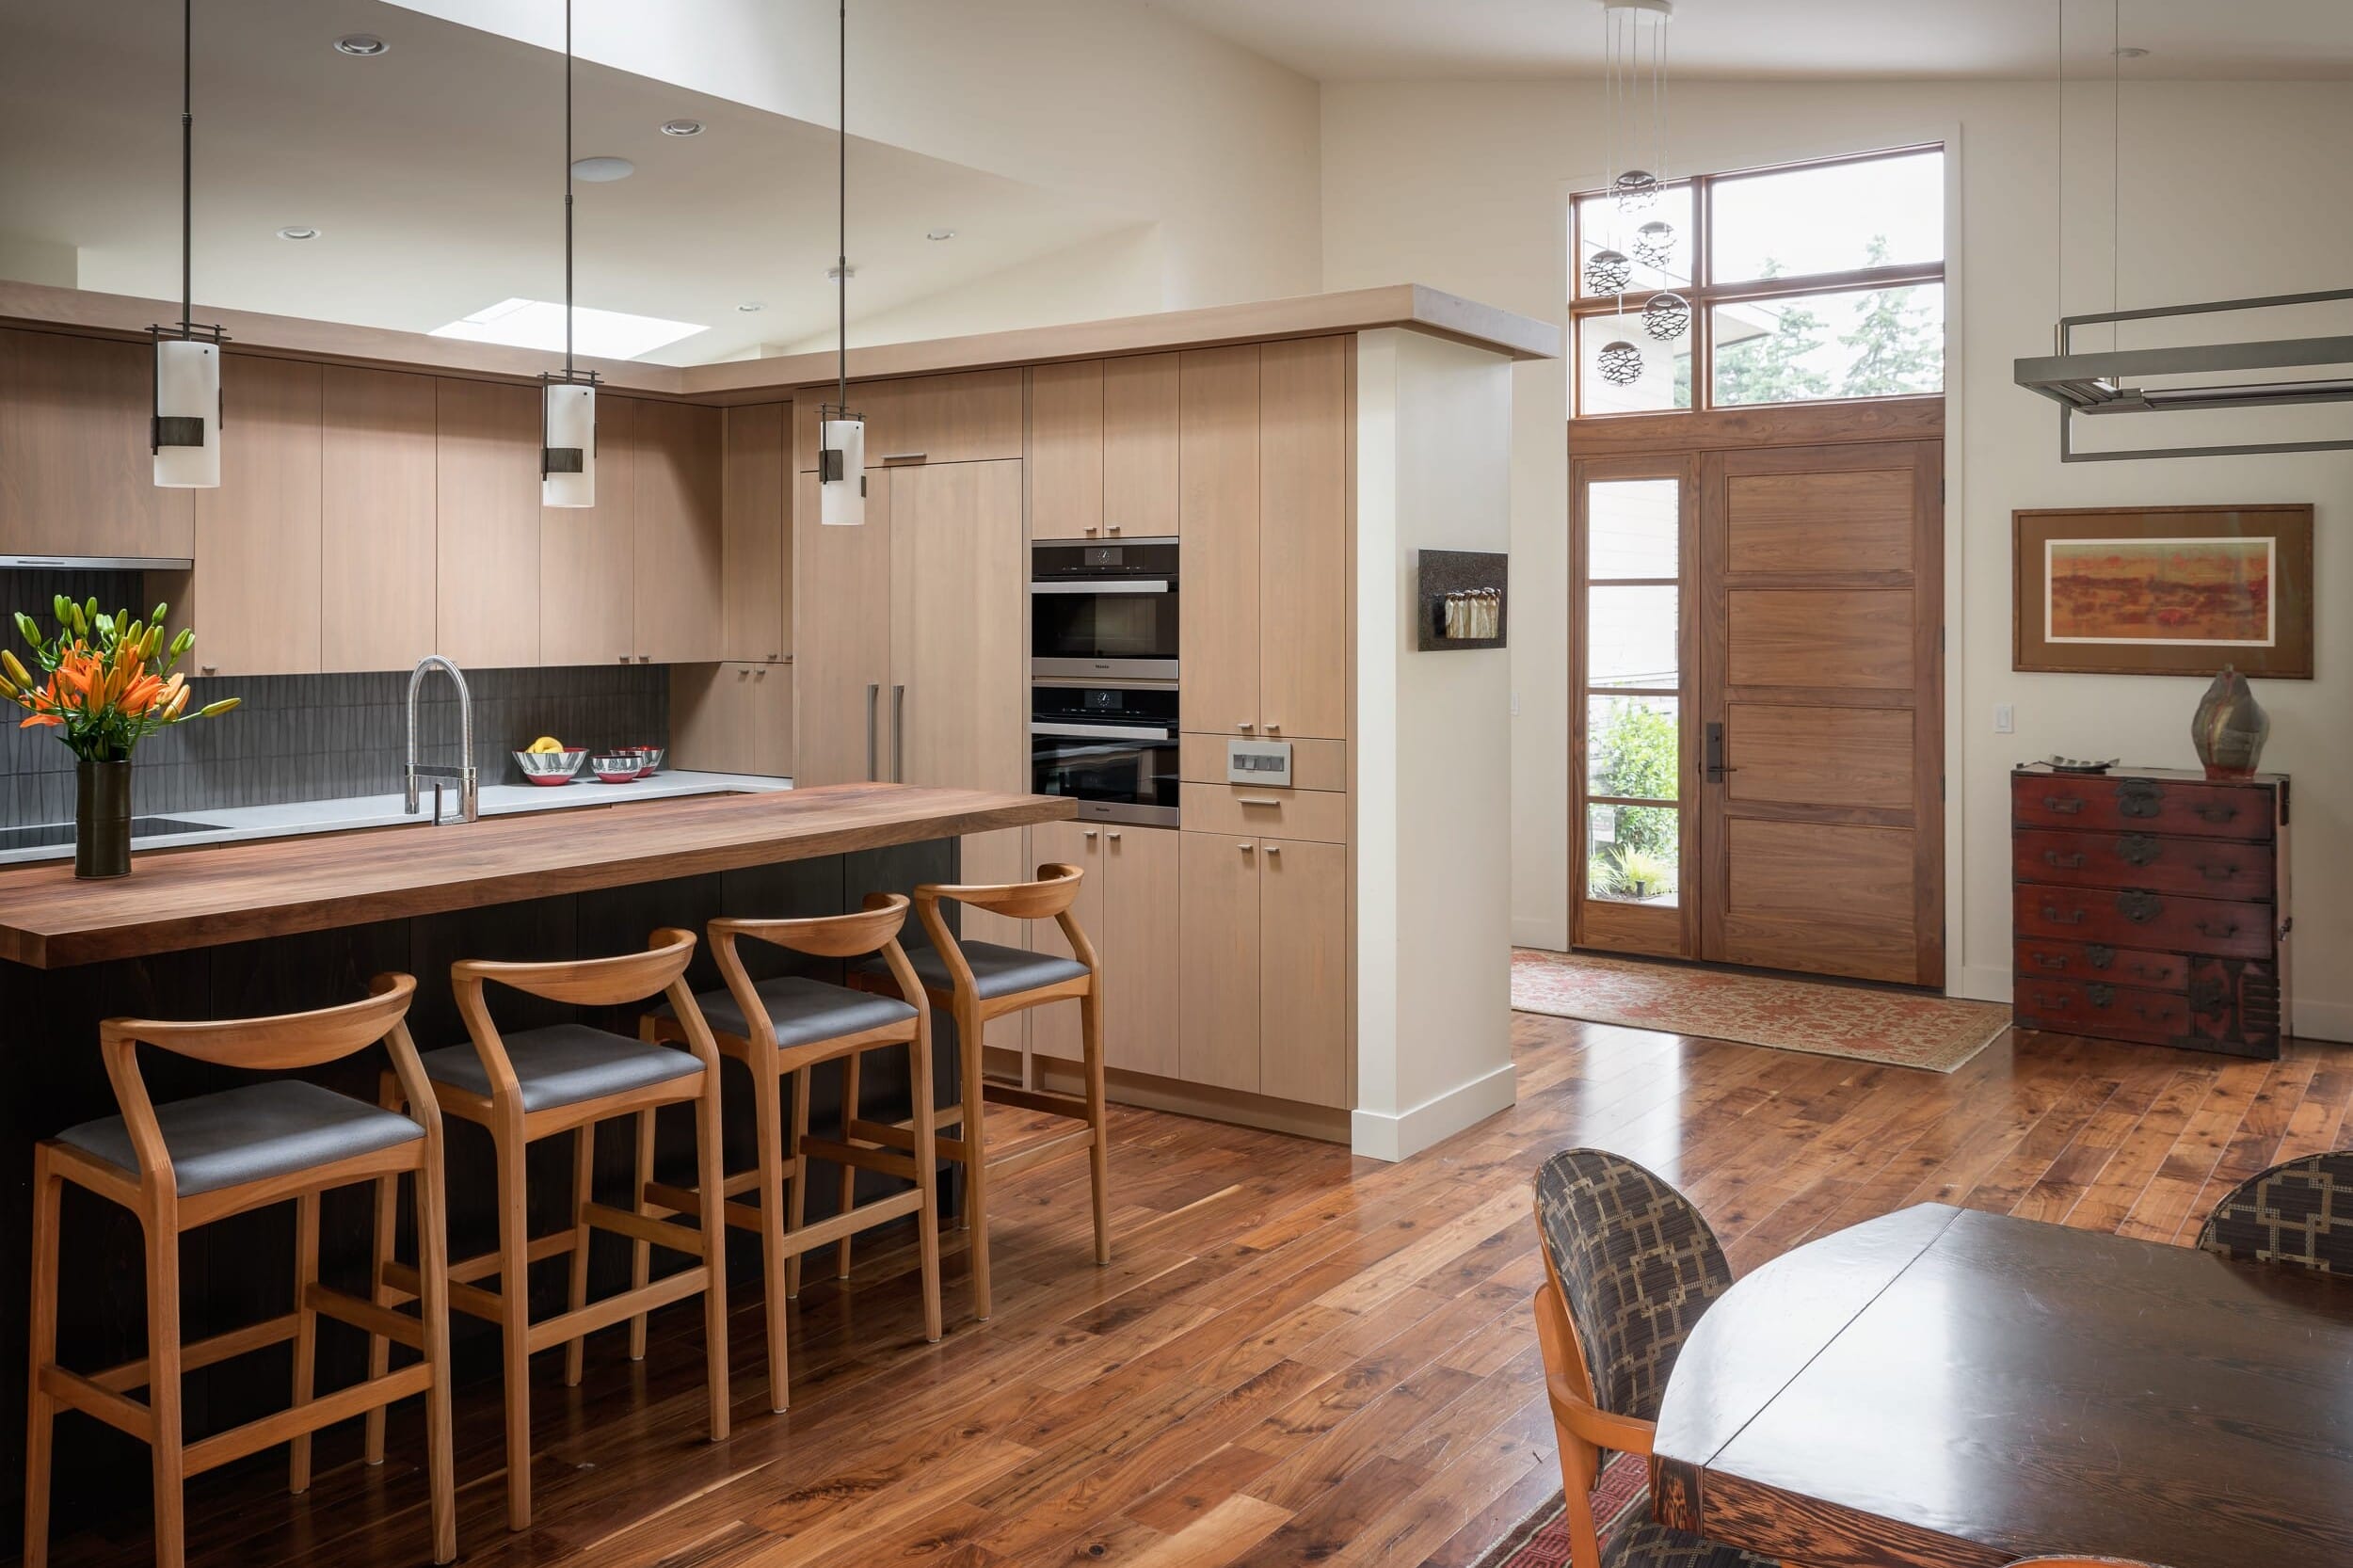 A modern kitchen with wooden floors.